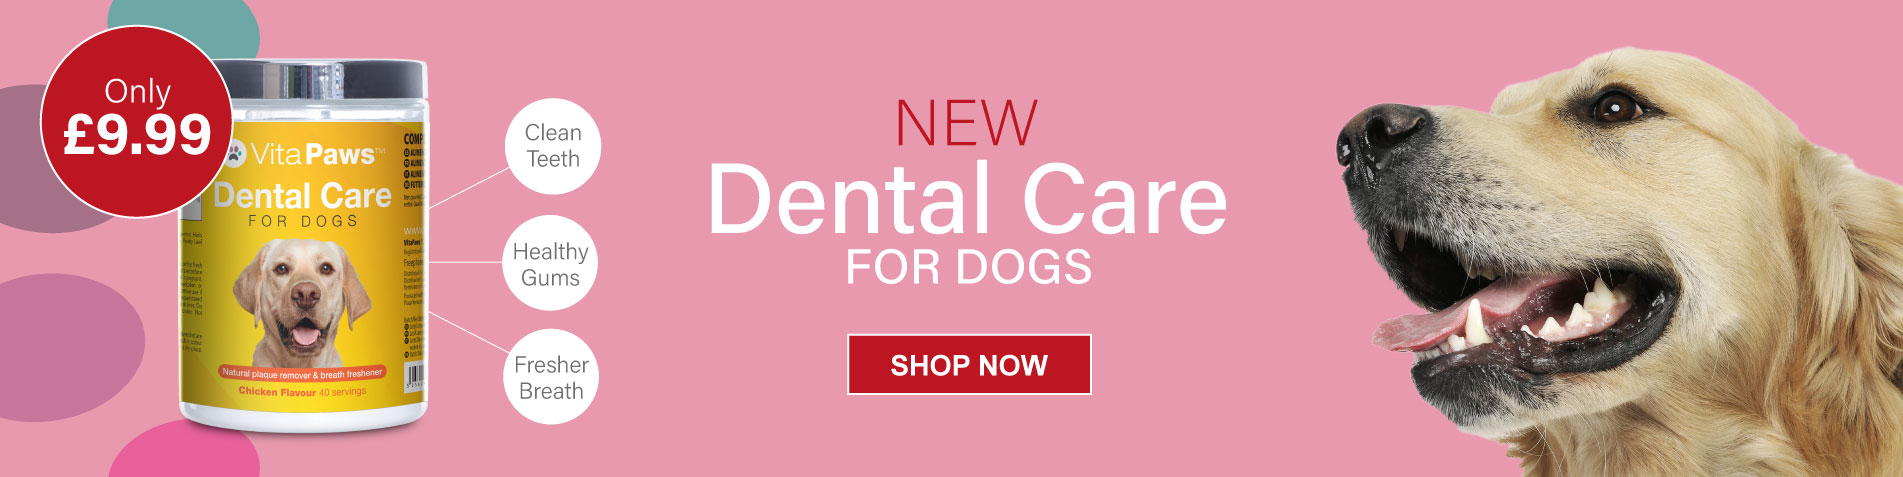 New Dental Care for Dogs